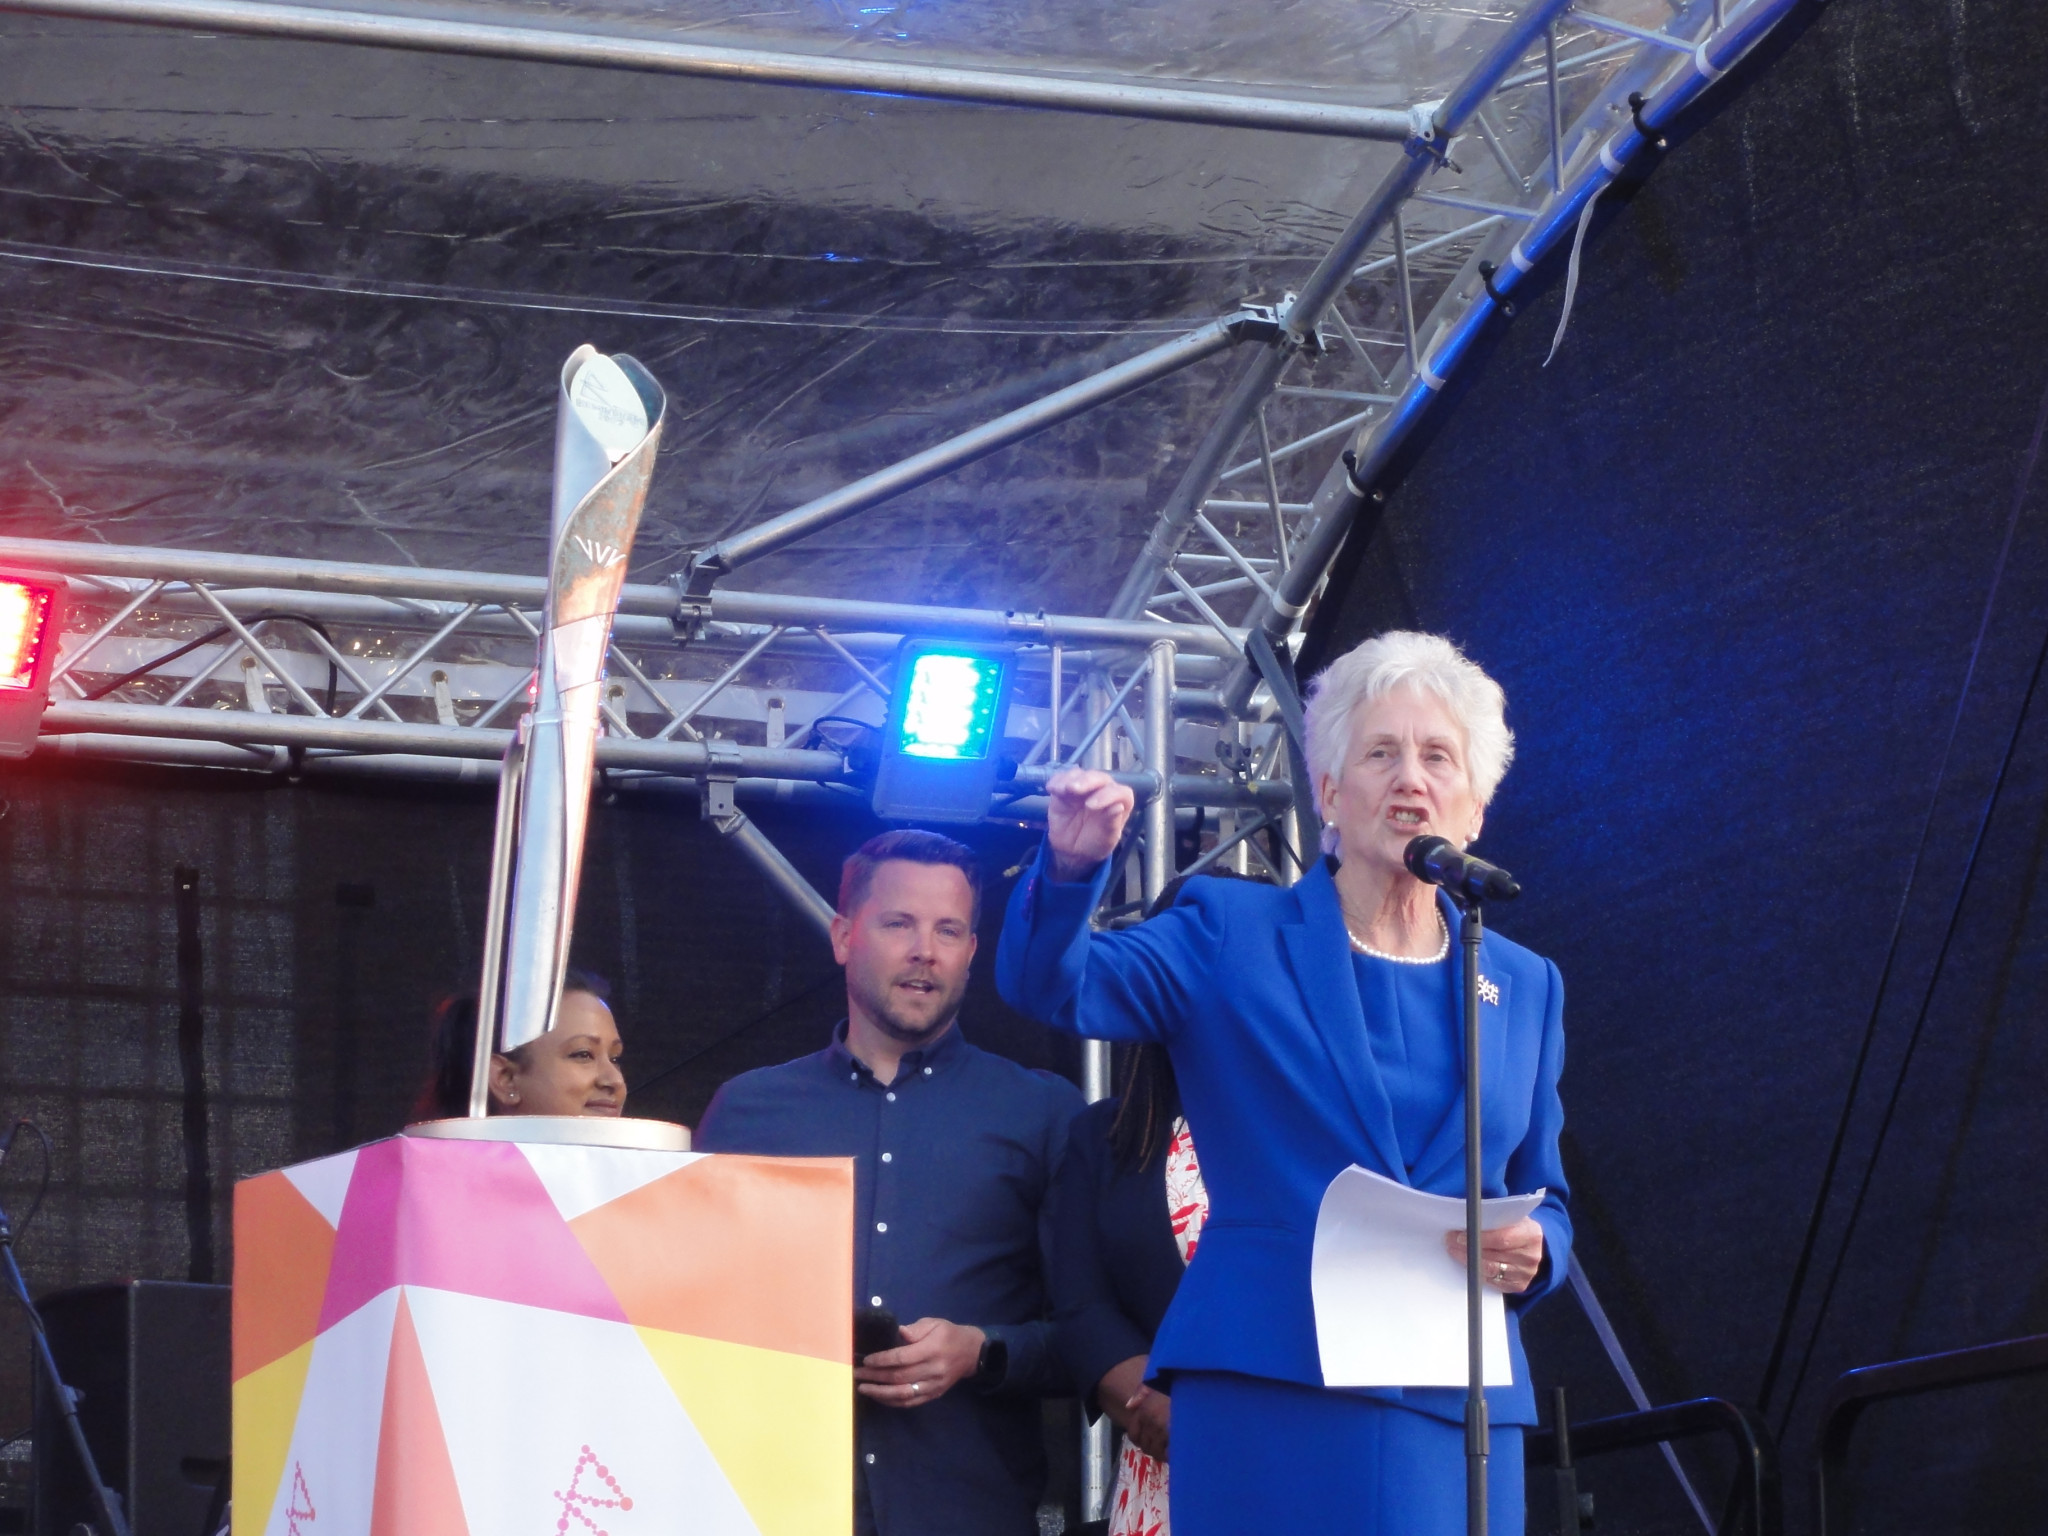 Commonwealth Games Federation President Louise Martin visited Battersea Power Station to welcome the Queen's Baton back to London ©ITG